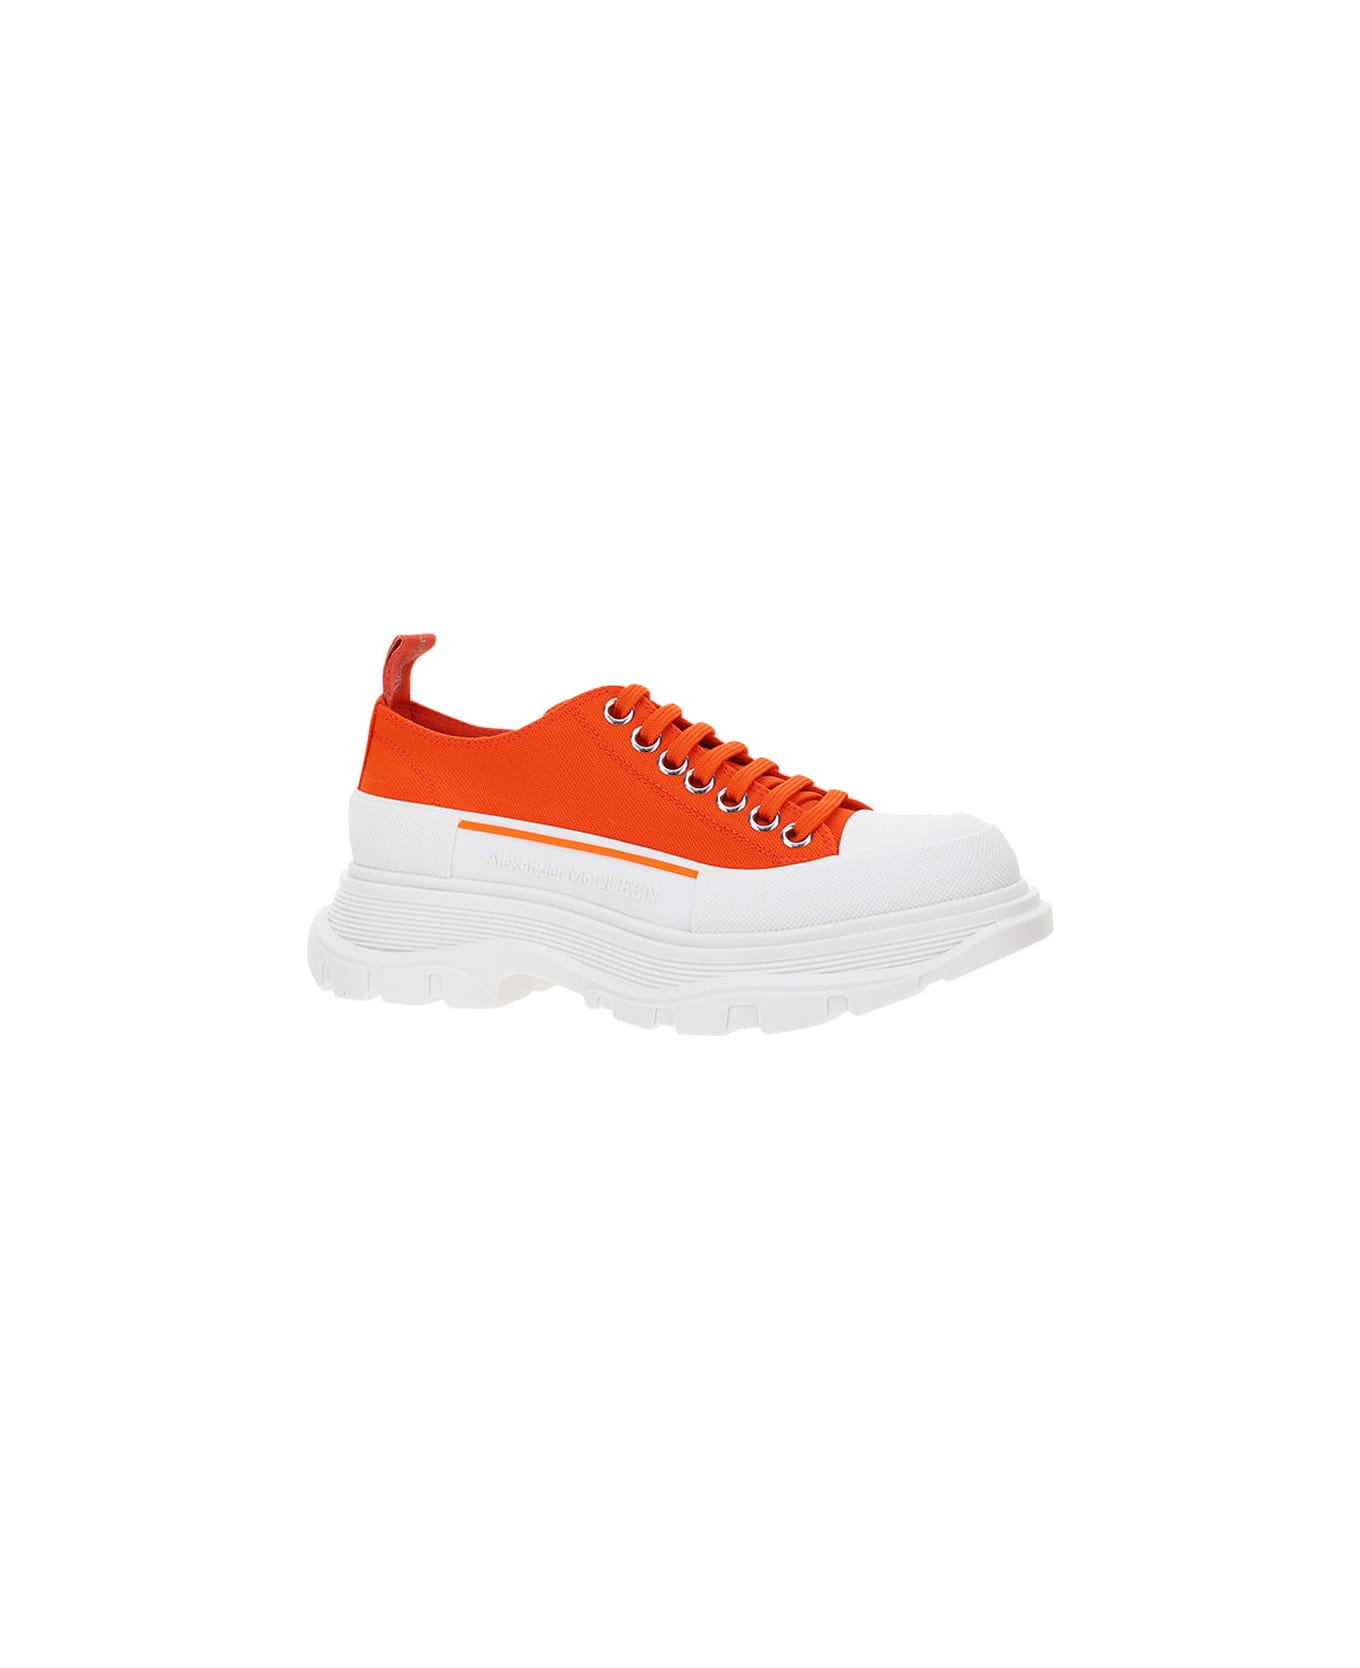 Alexander McQueen Tread Slick Sneakers - Lu.or/of.wh/l.o./si